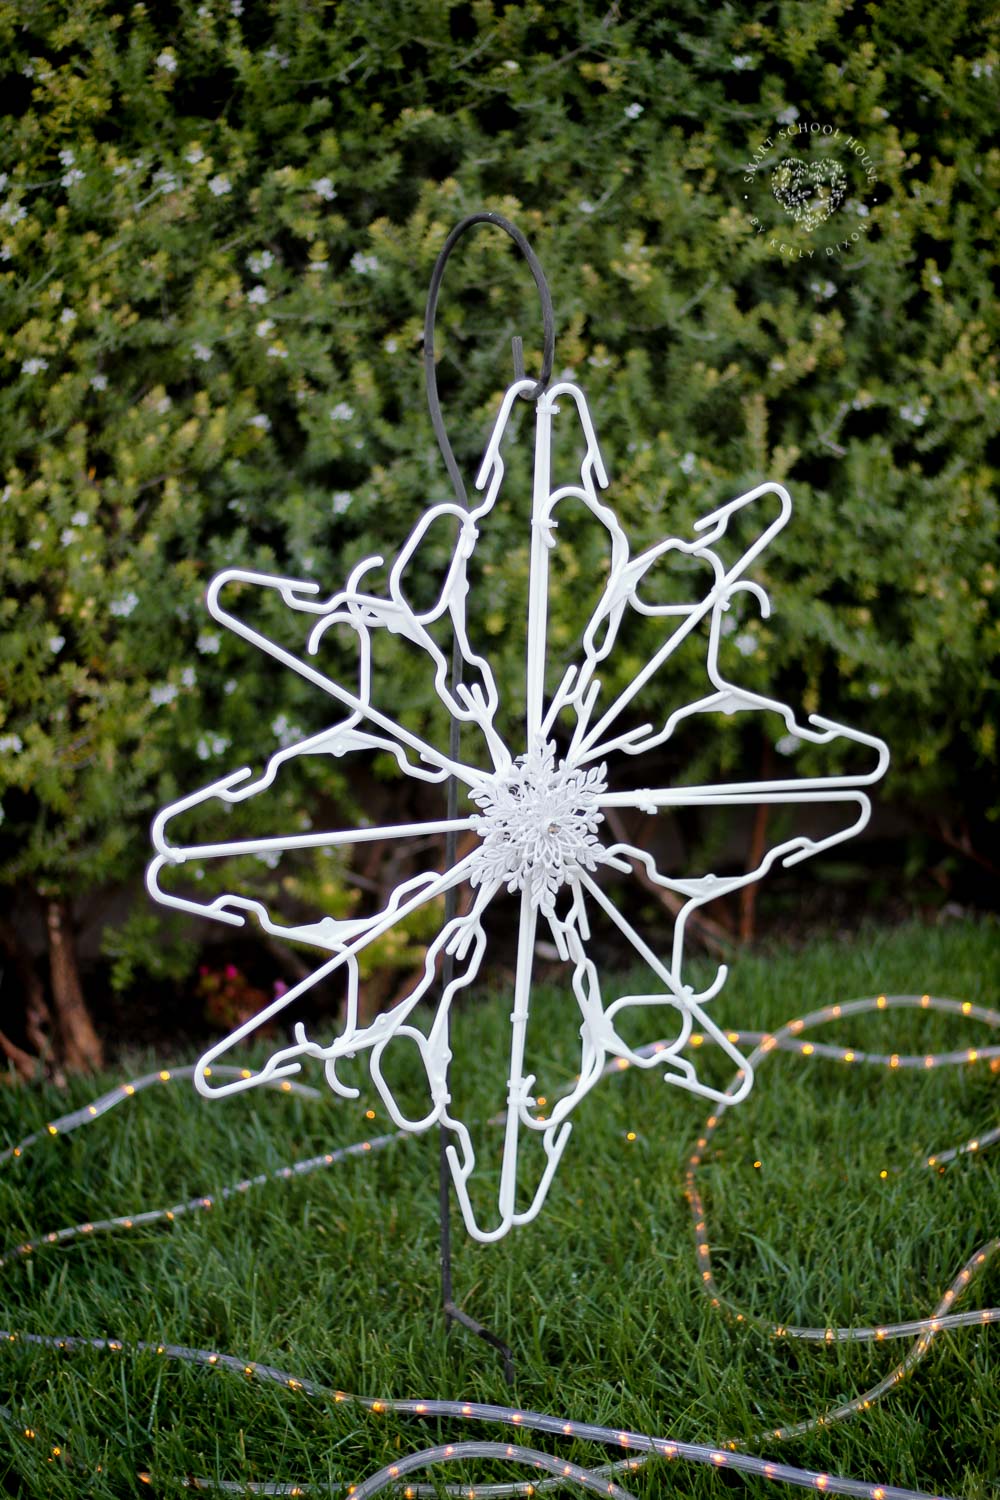 Use child size plastic hangers and zip ties to make a hanger snowflake! Decorate for the holidays with these beautiful DIY snowflakes made out of hangers.